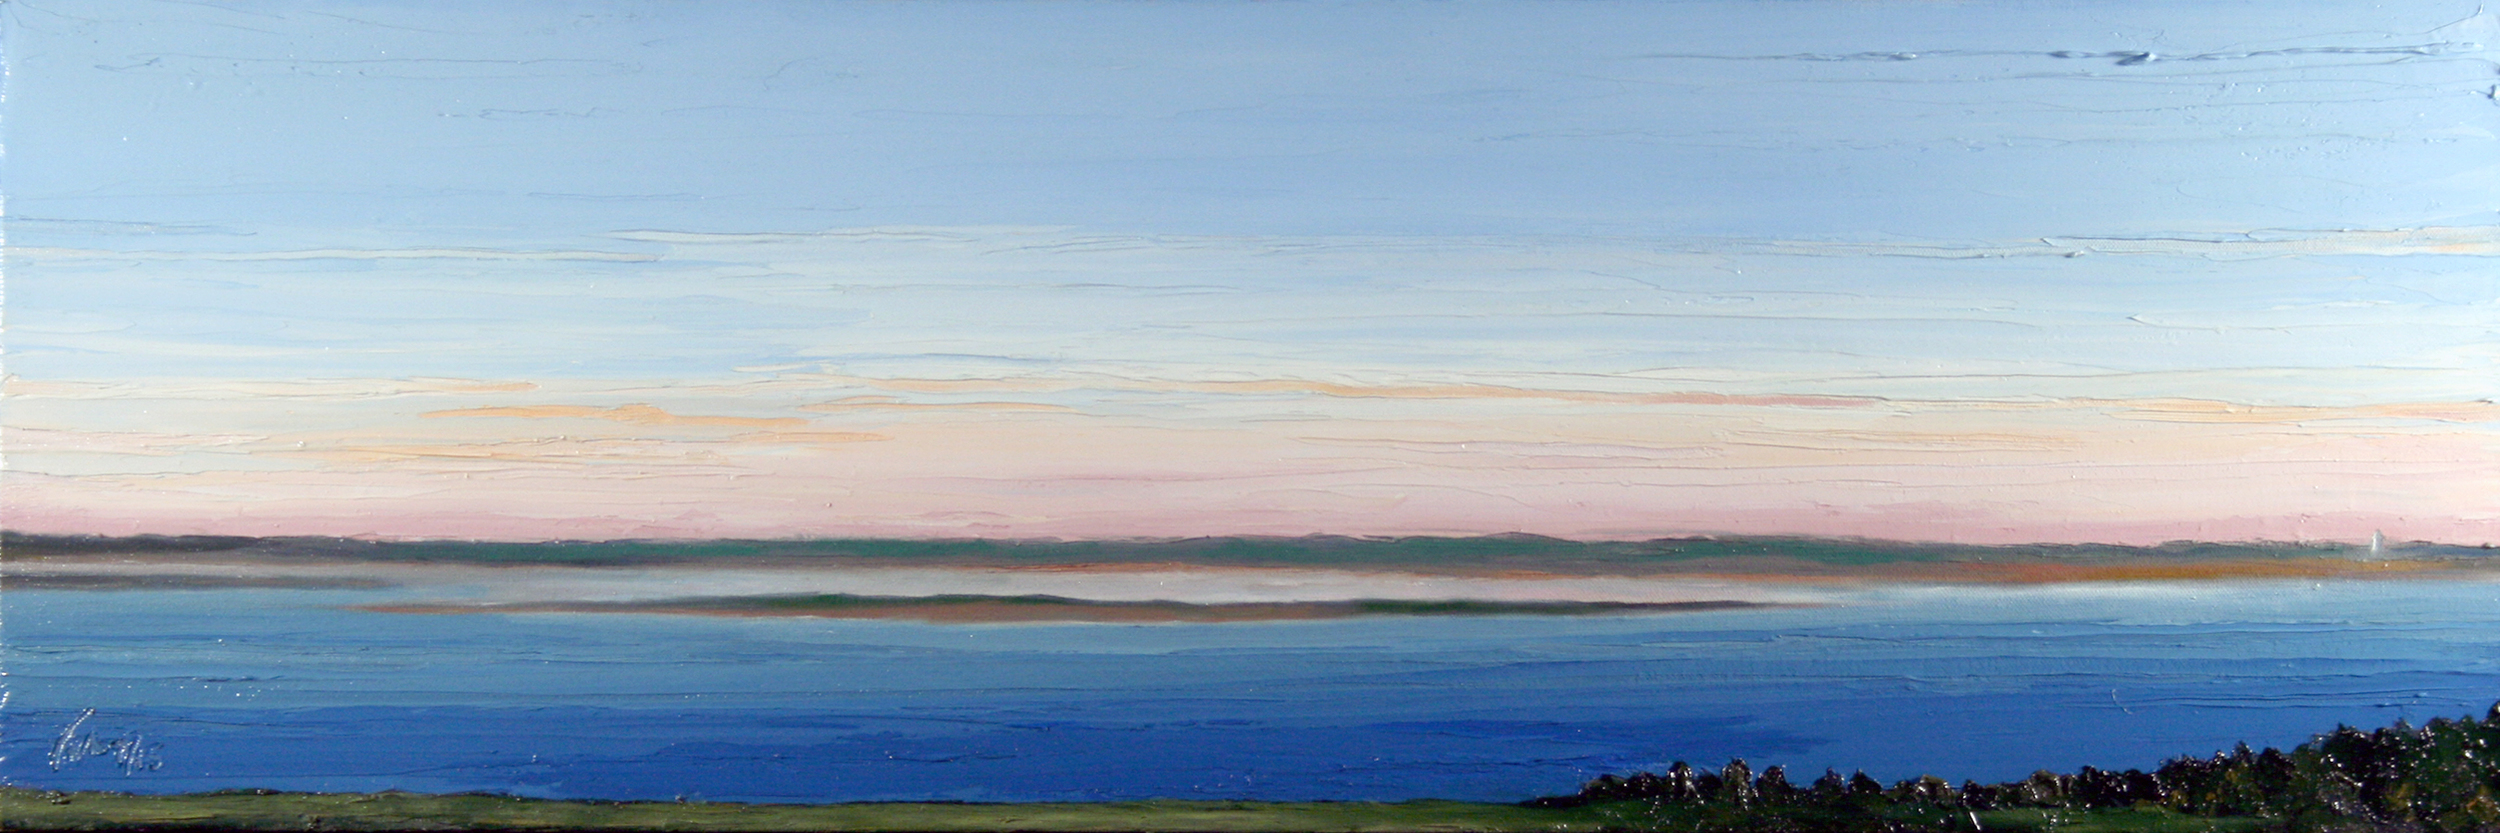 Torney - Donahue View, Barnstable MA to Chatham Light - oil on canvas, 12 by 36 inches, 2015.jpg